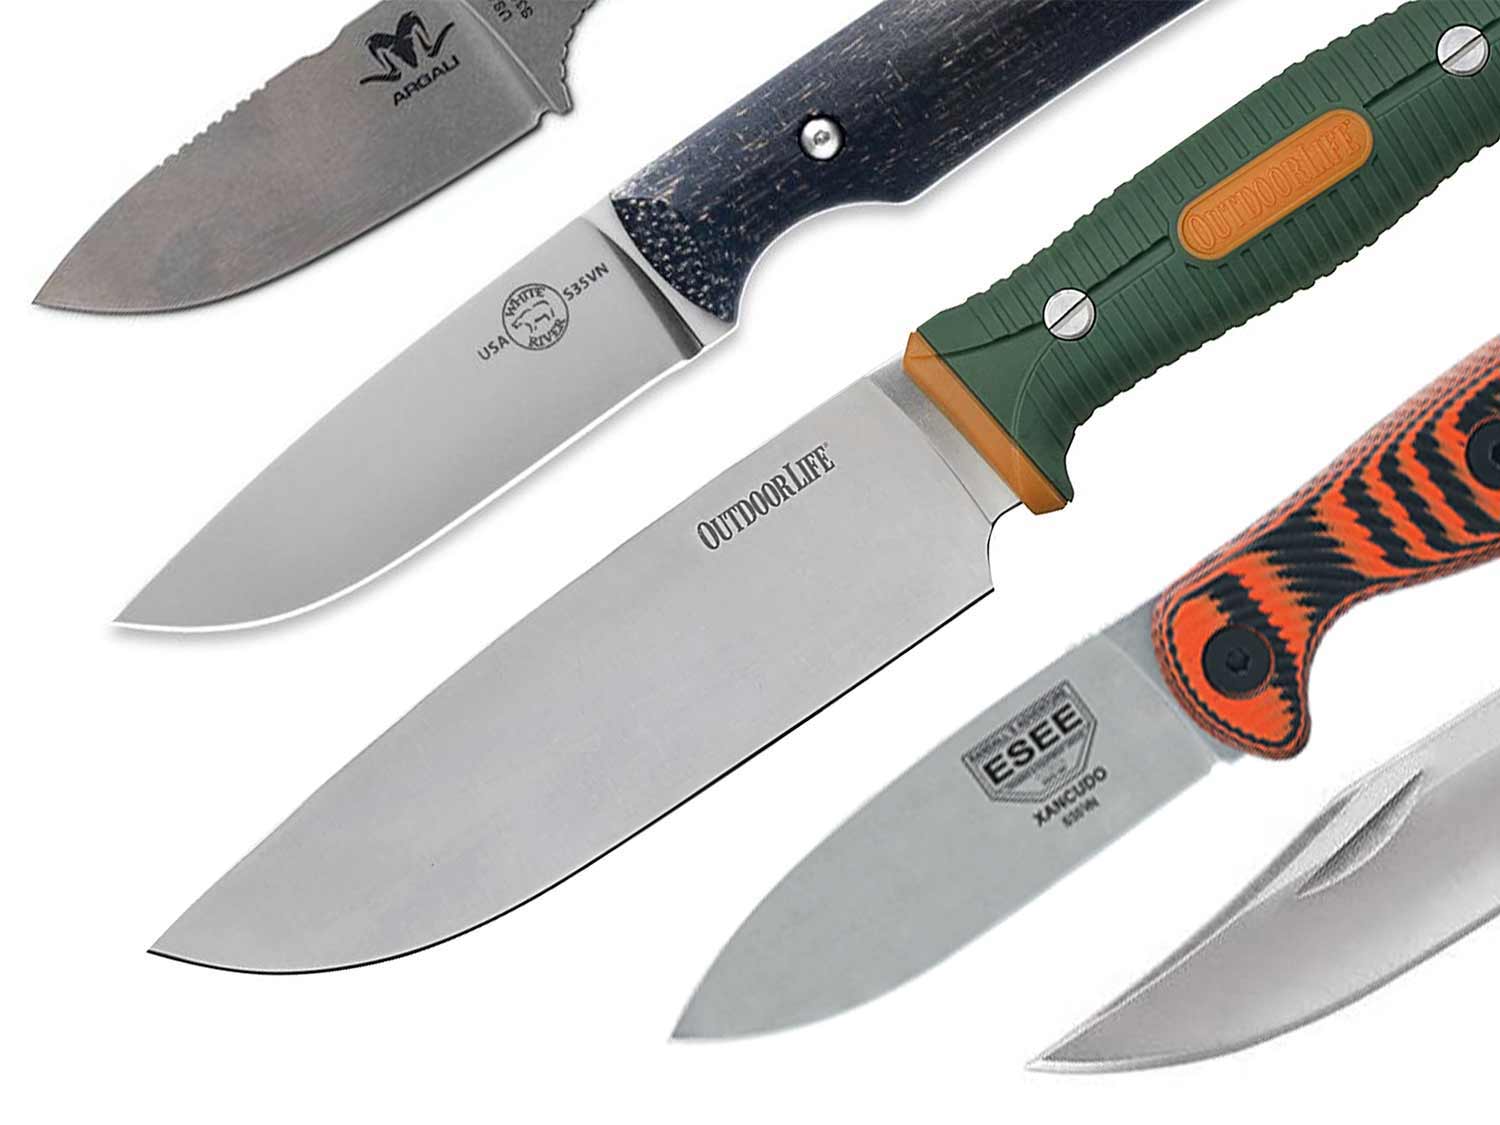 The 3 Best Knife Steels According To Science!